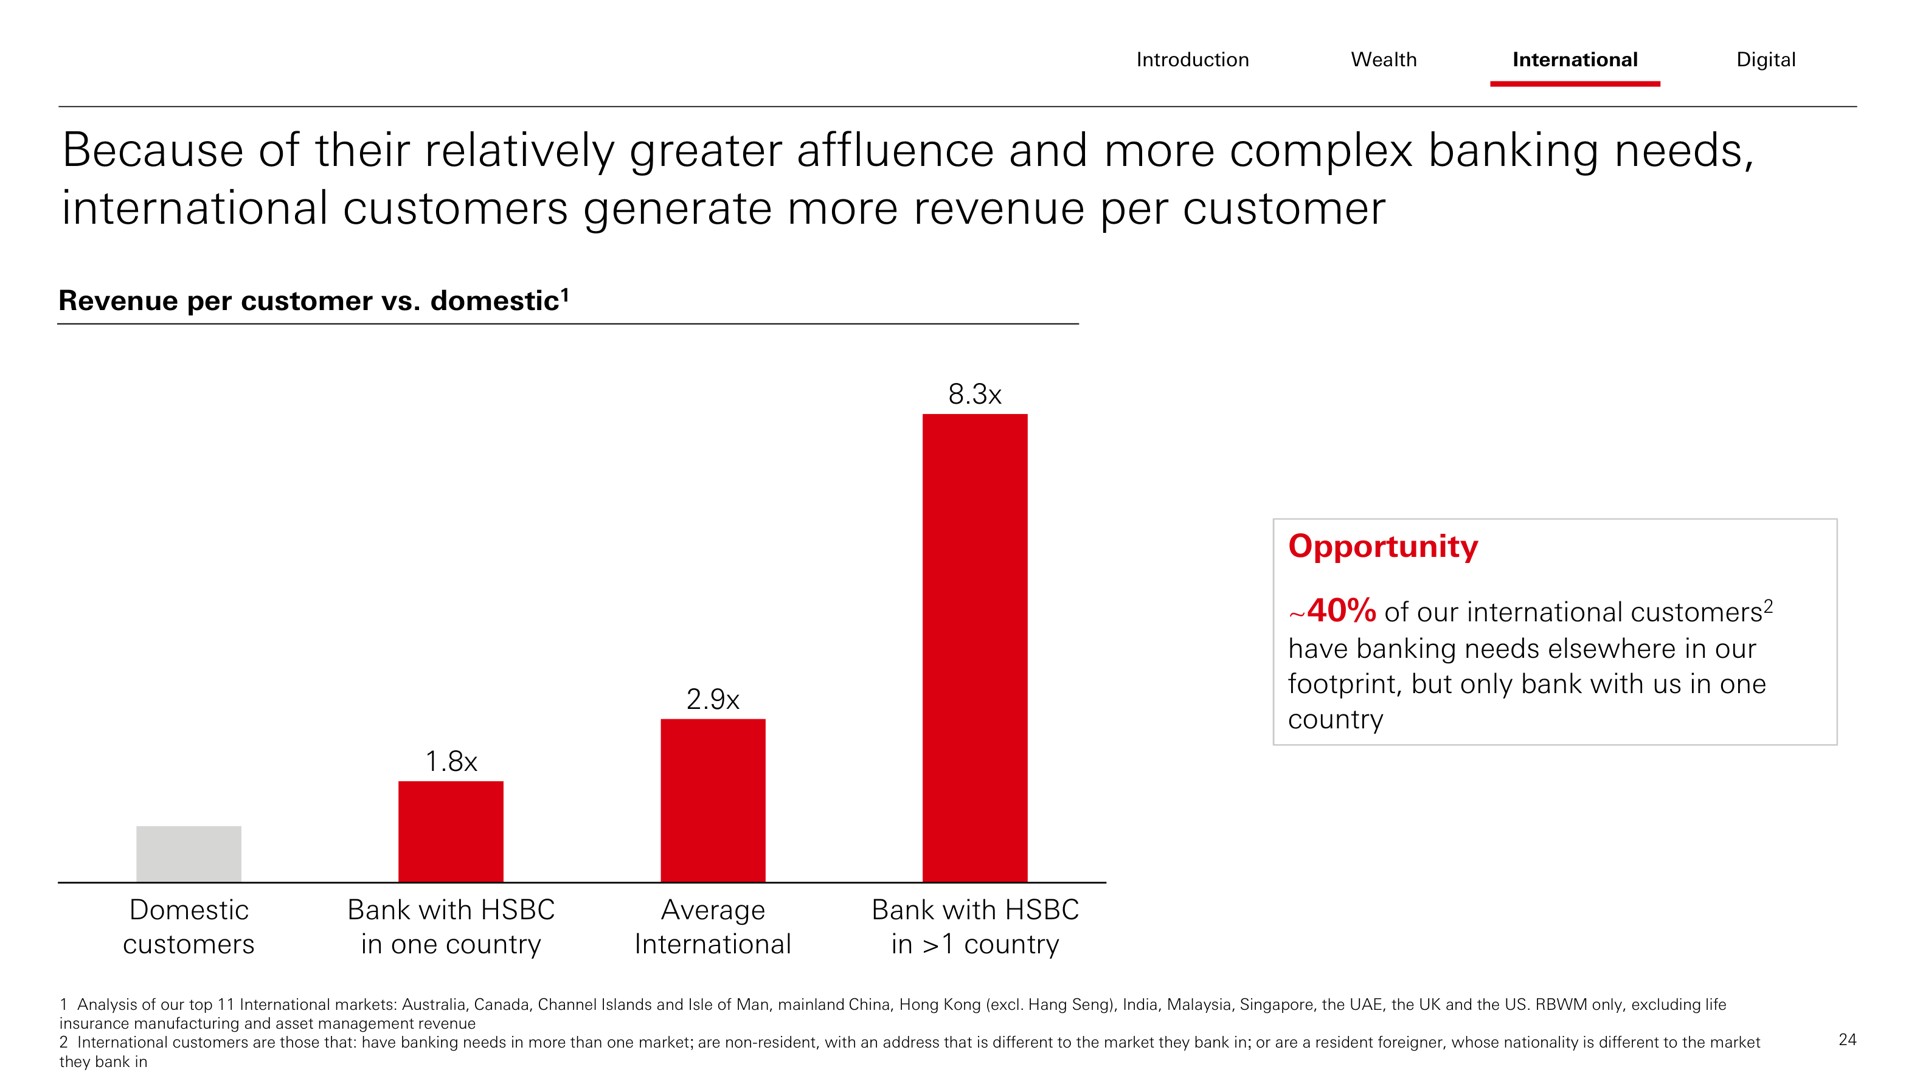 because of their relatively greater affluence and more complex banking needs international customers generate more revenue per customer | HSBC